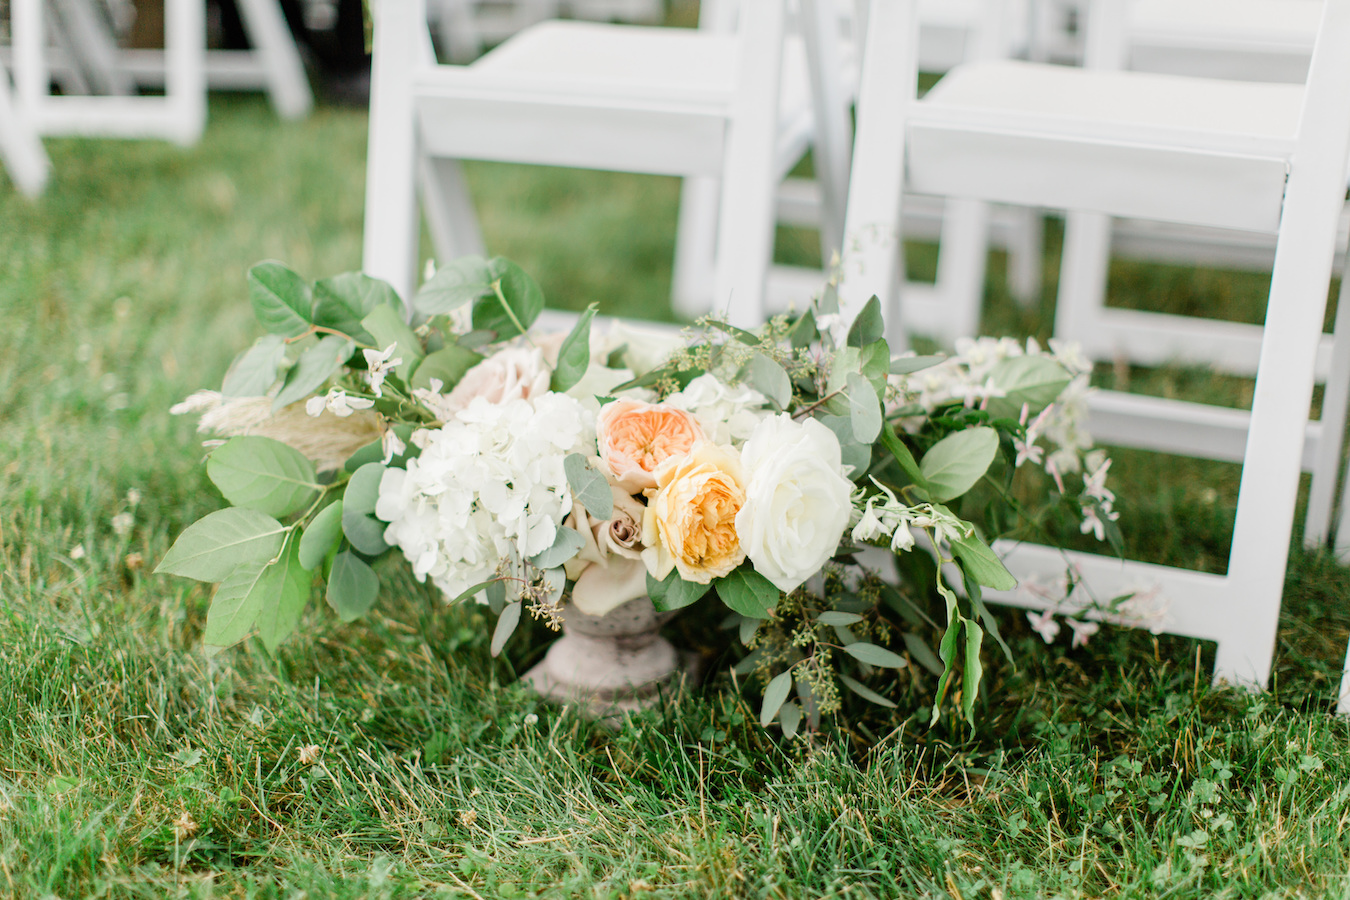 A large floral arrangement rests on the ground before a Holland, Michigan wedding